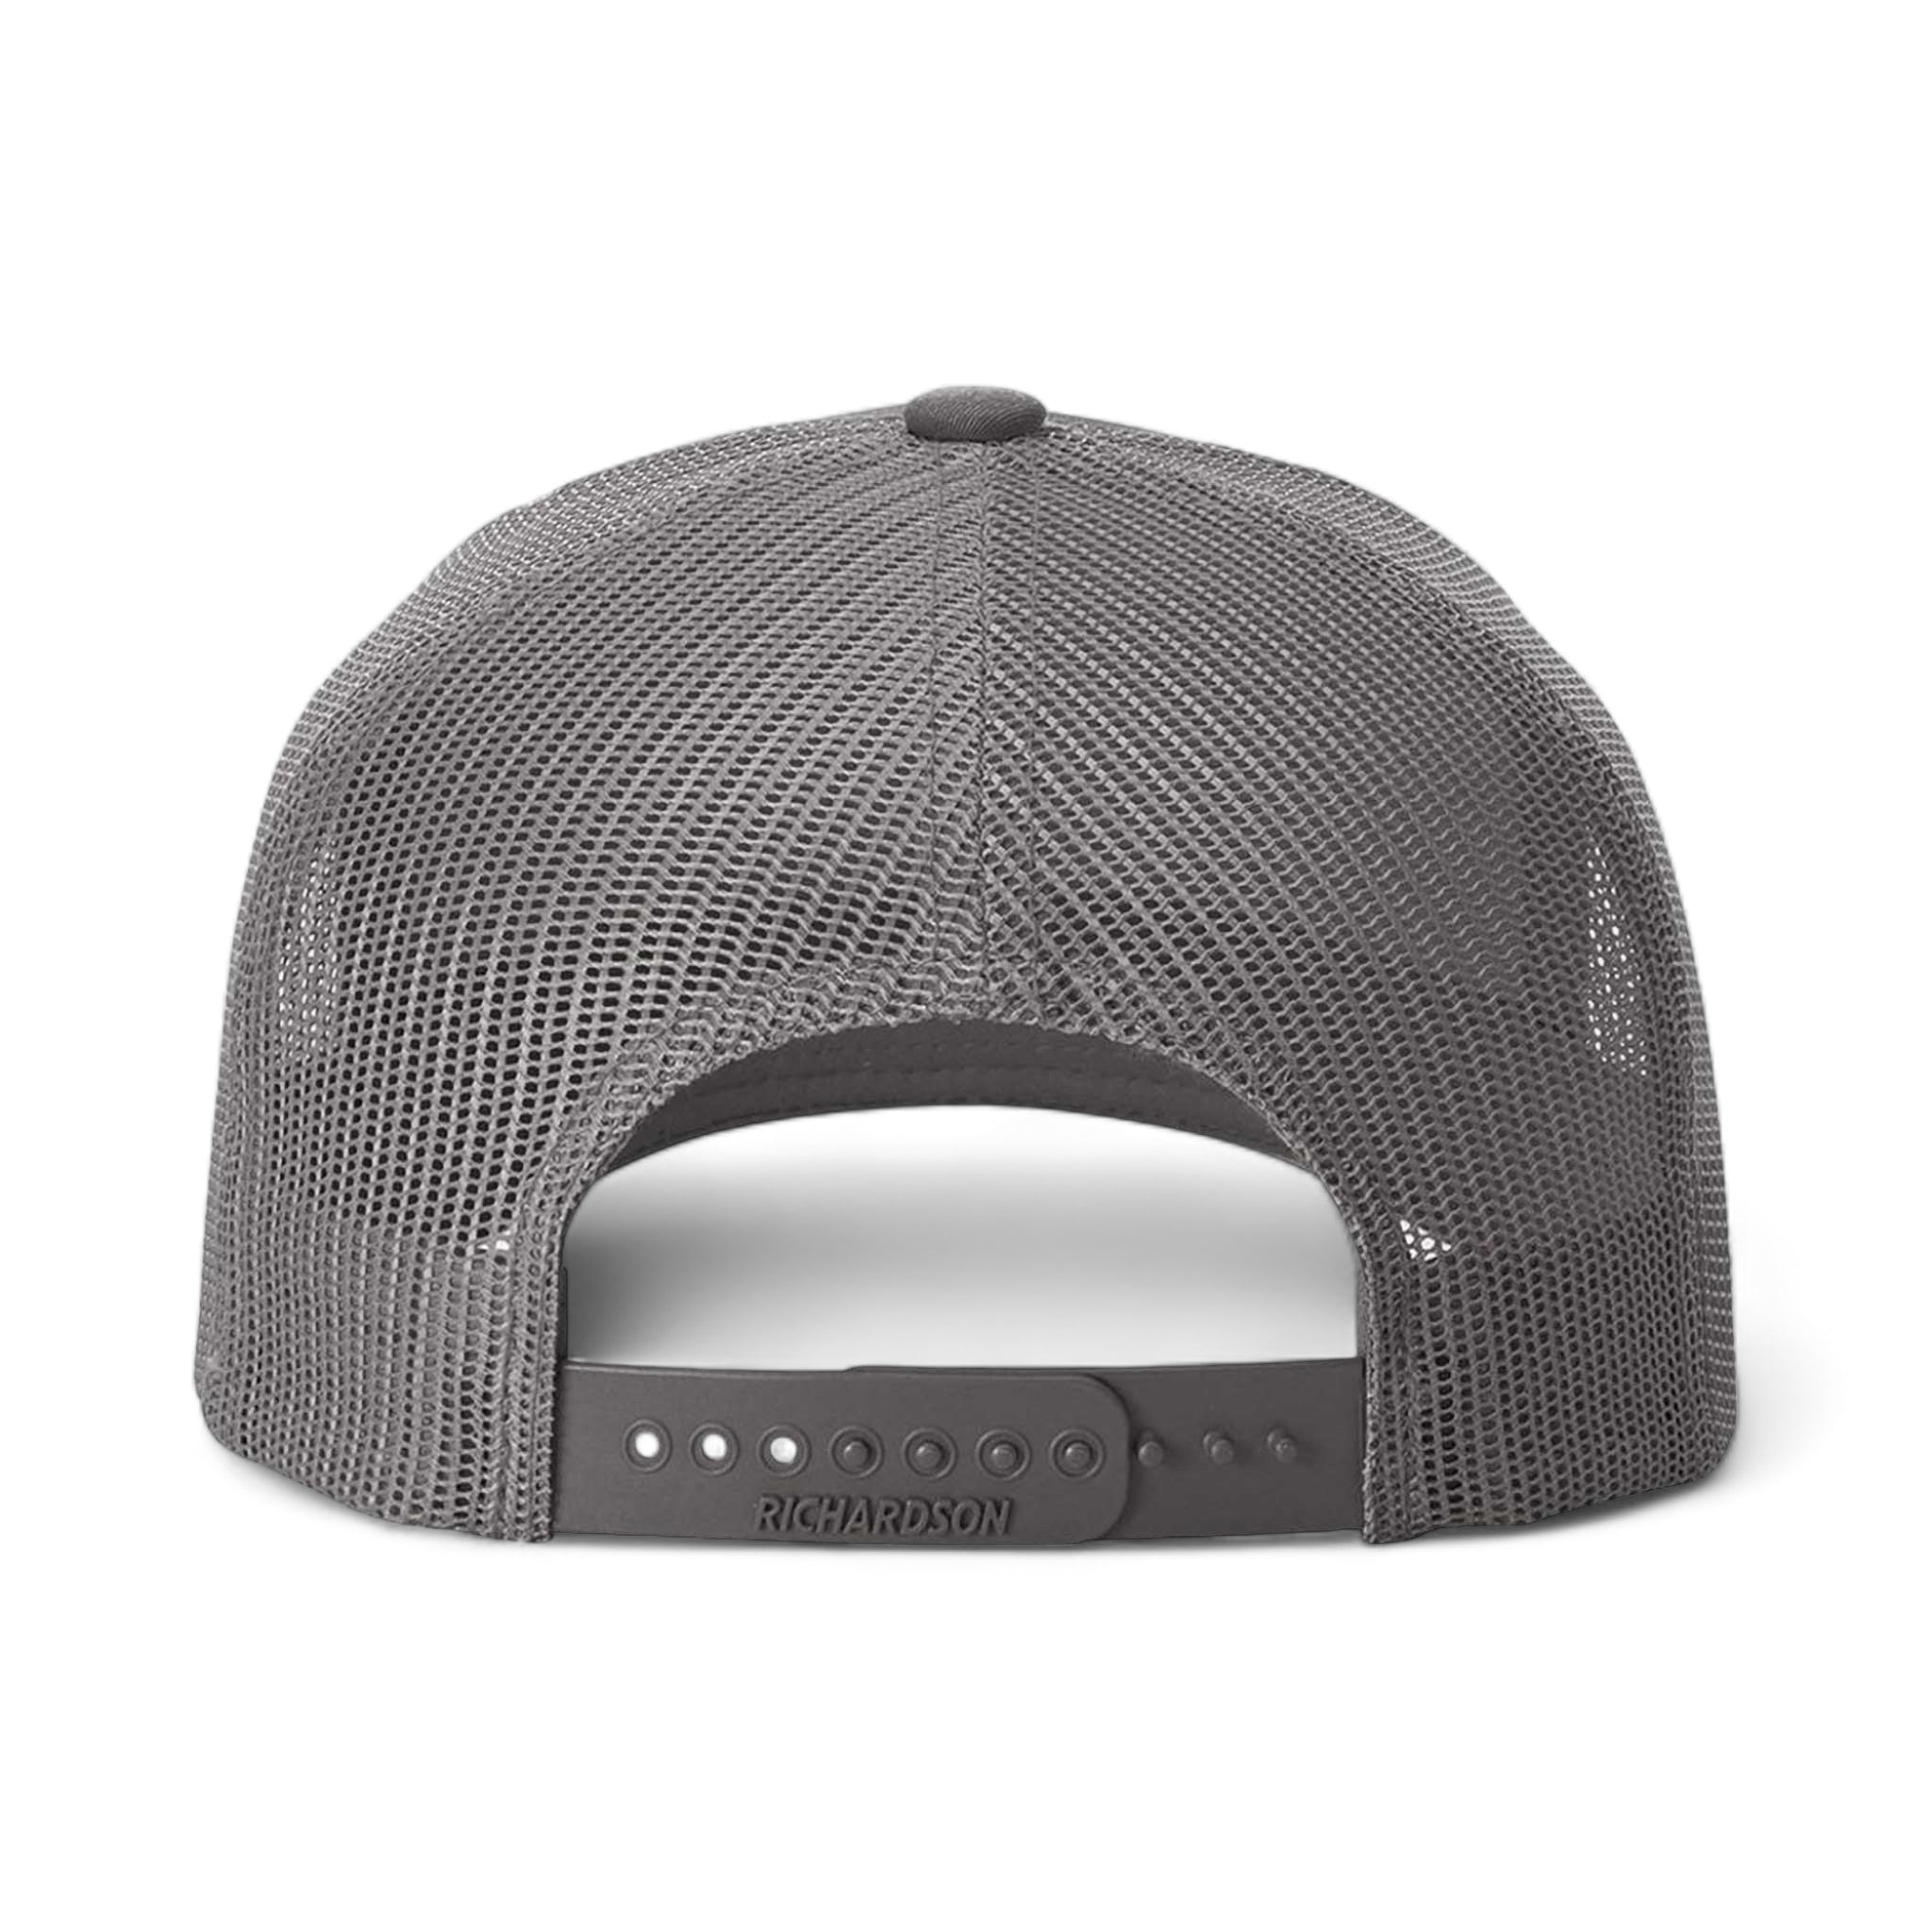 Back view of Richardson 112FPR custom hat in charcoal